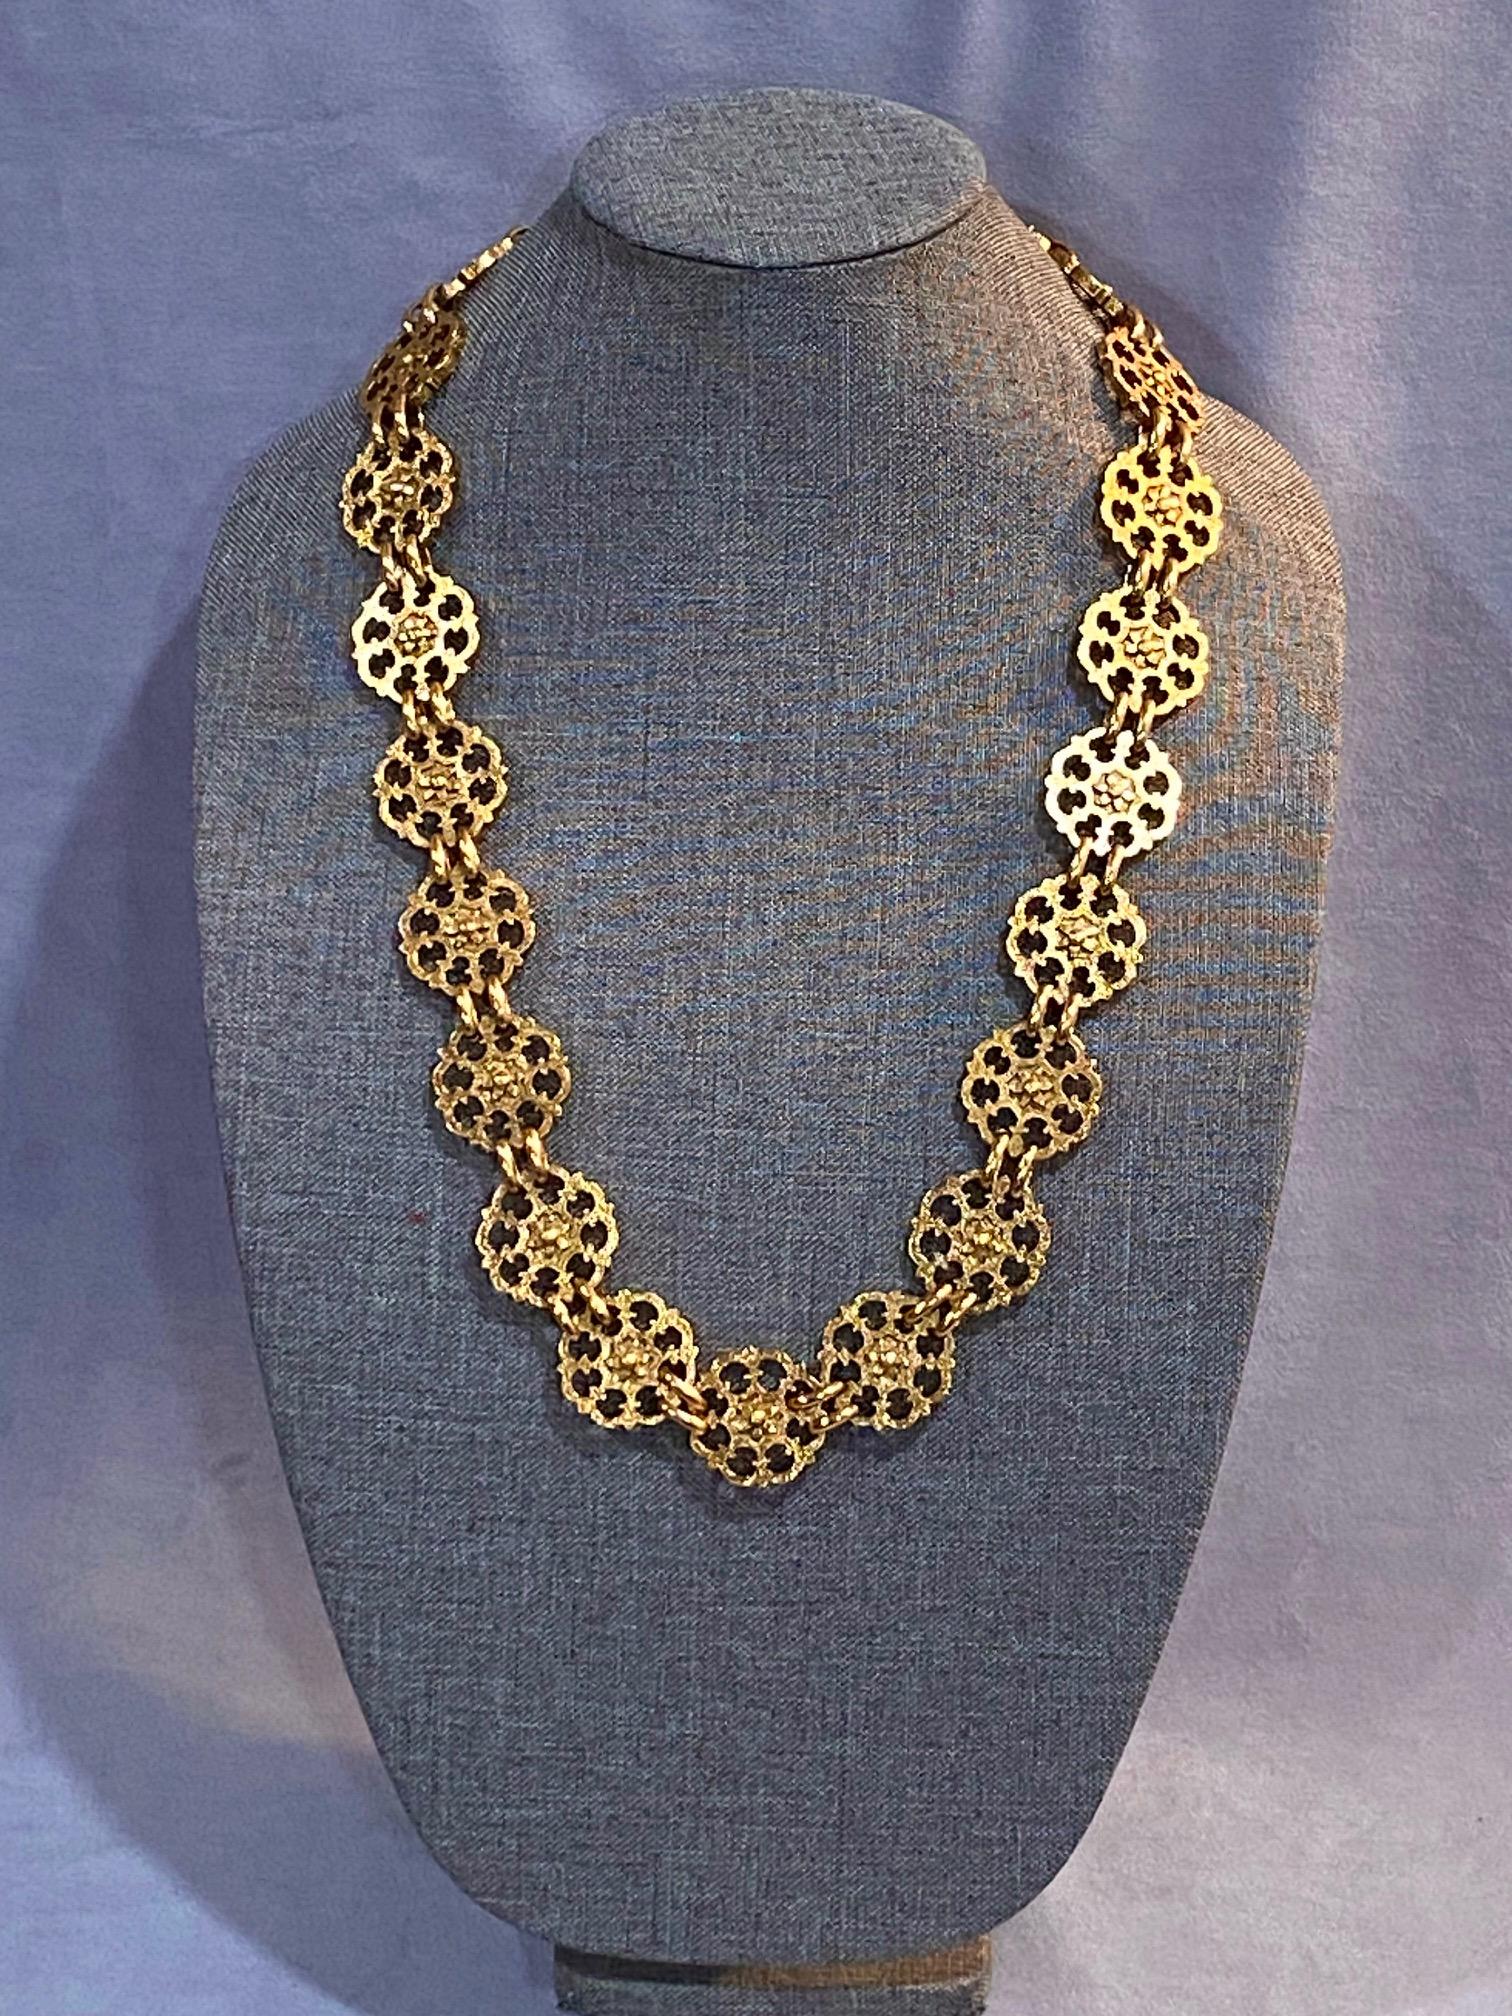 Yves Saint Laurent, Rive Gauche, 1980s Necklace / Belt In Excellent Condition For Sale In New York, NY